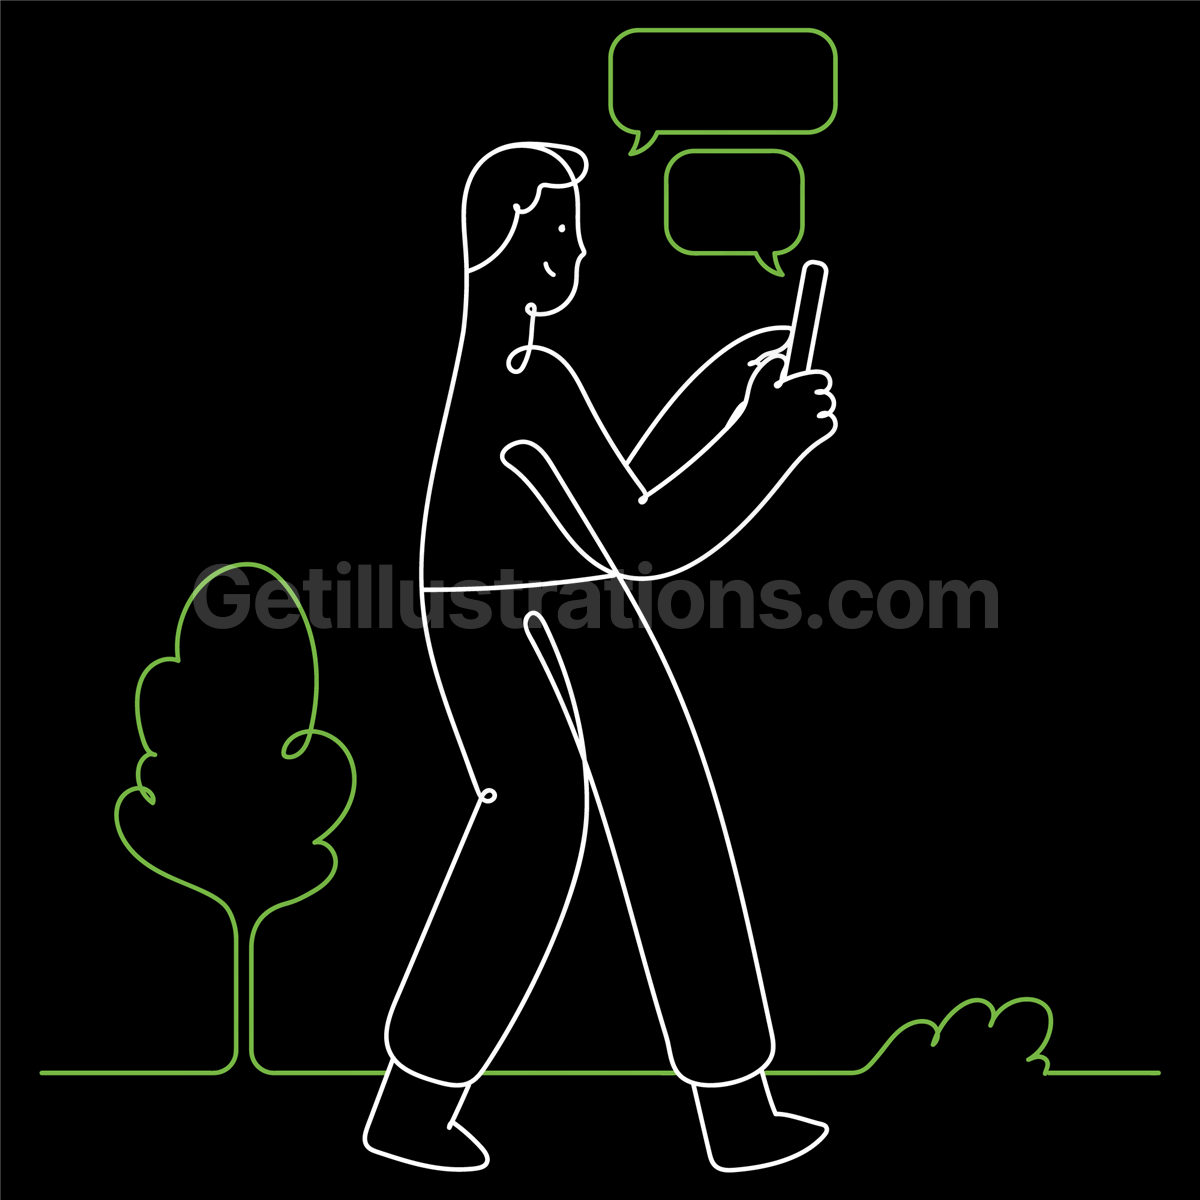 chat, conversation, talk, smartphone, phone, mobile, man, people